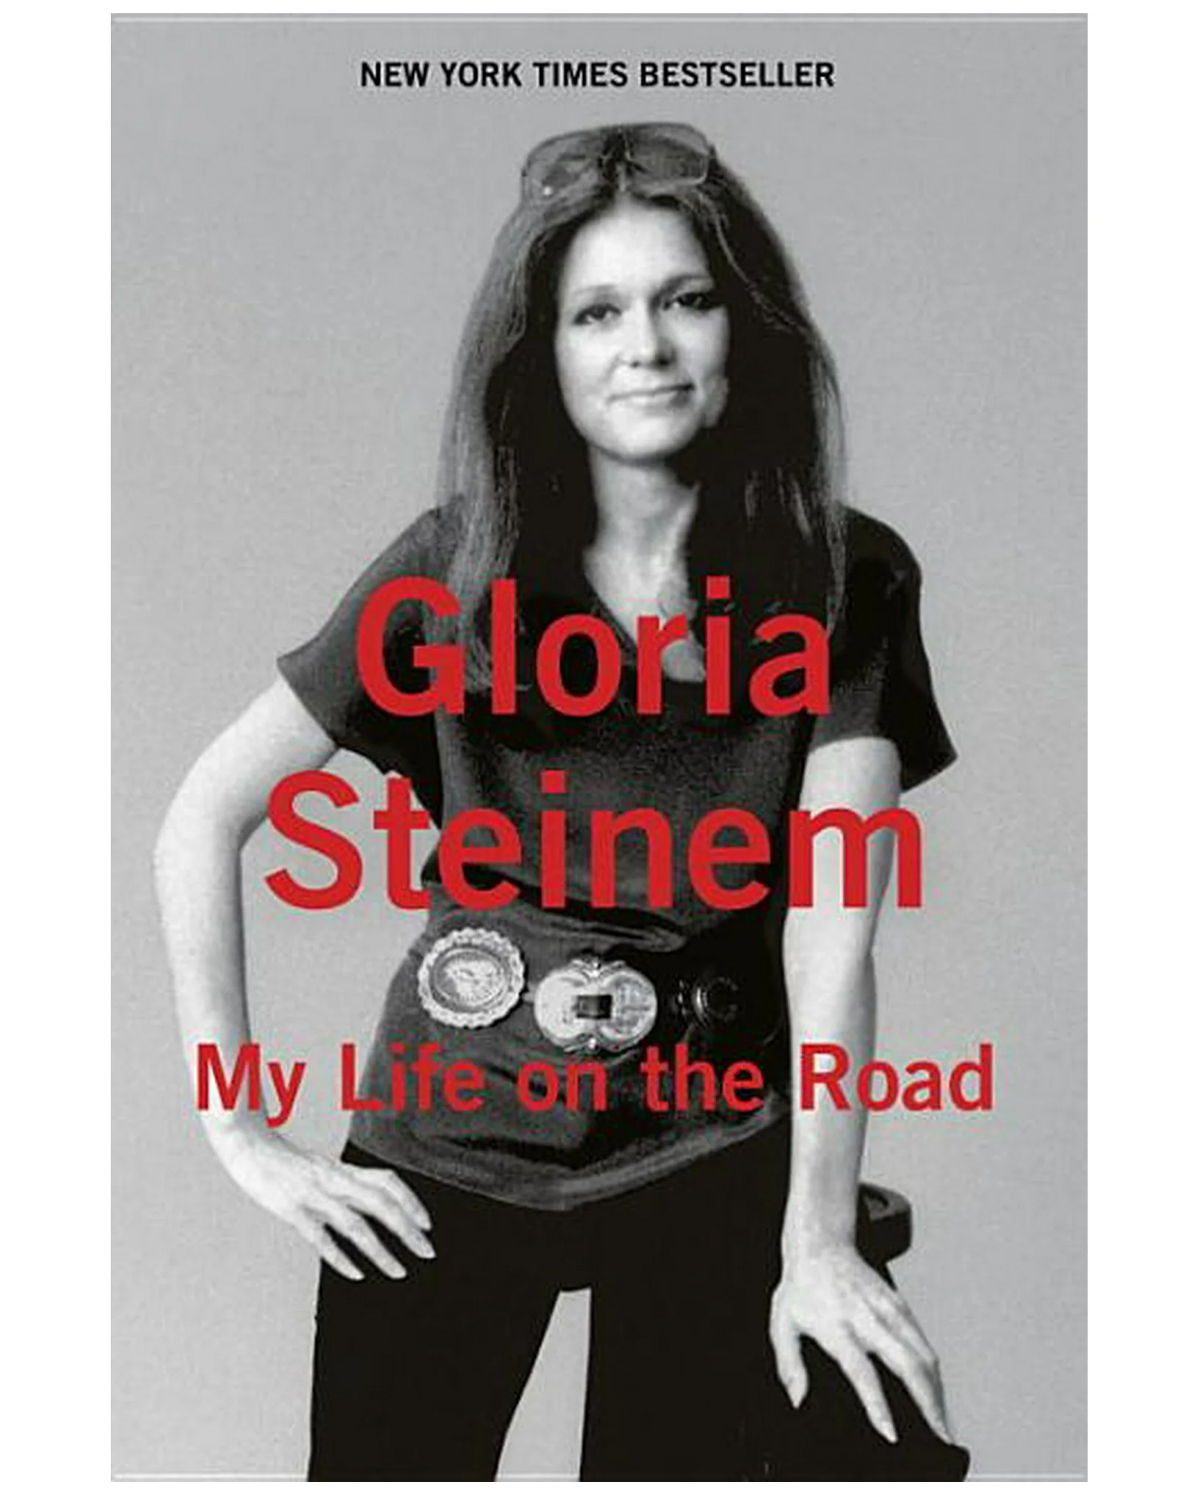 GloriaSteinem, author of My Life On the Road at the Milford Readers and Writers Festival